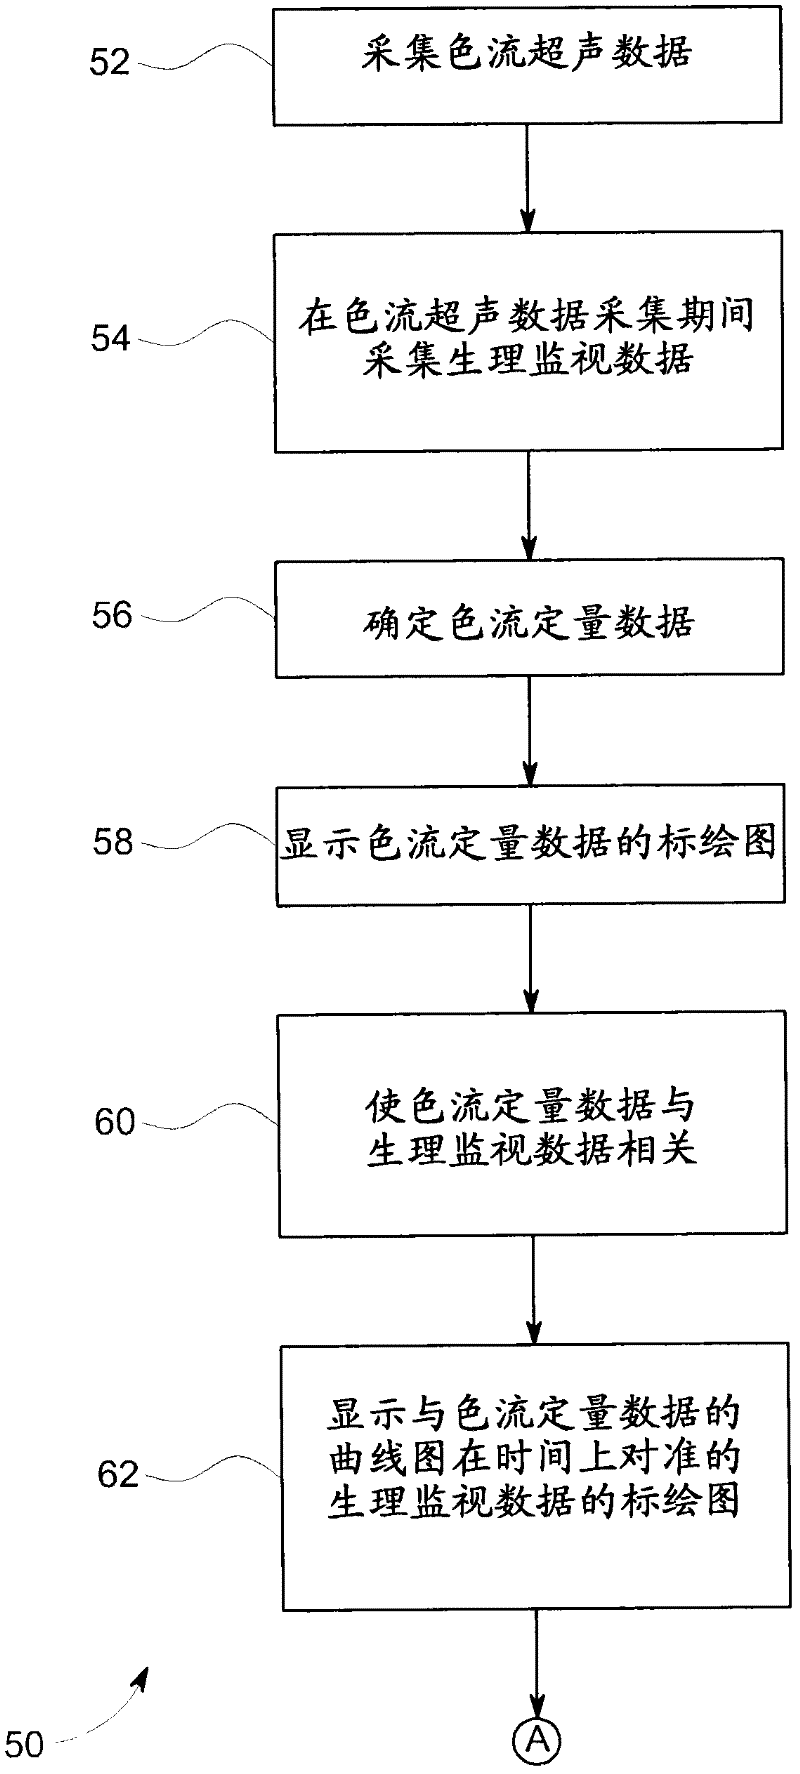 Method and system for displaying ultrasound data